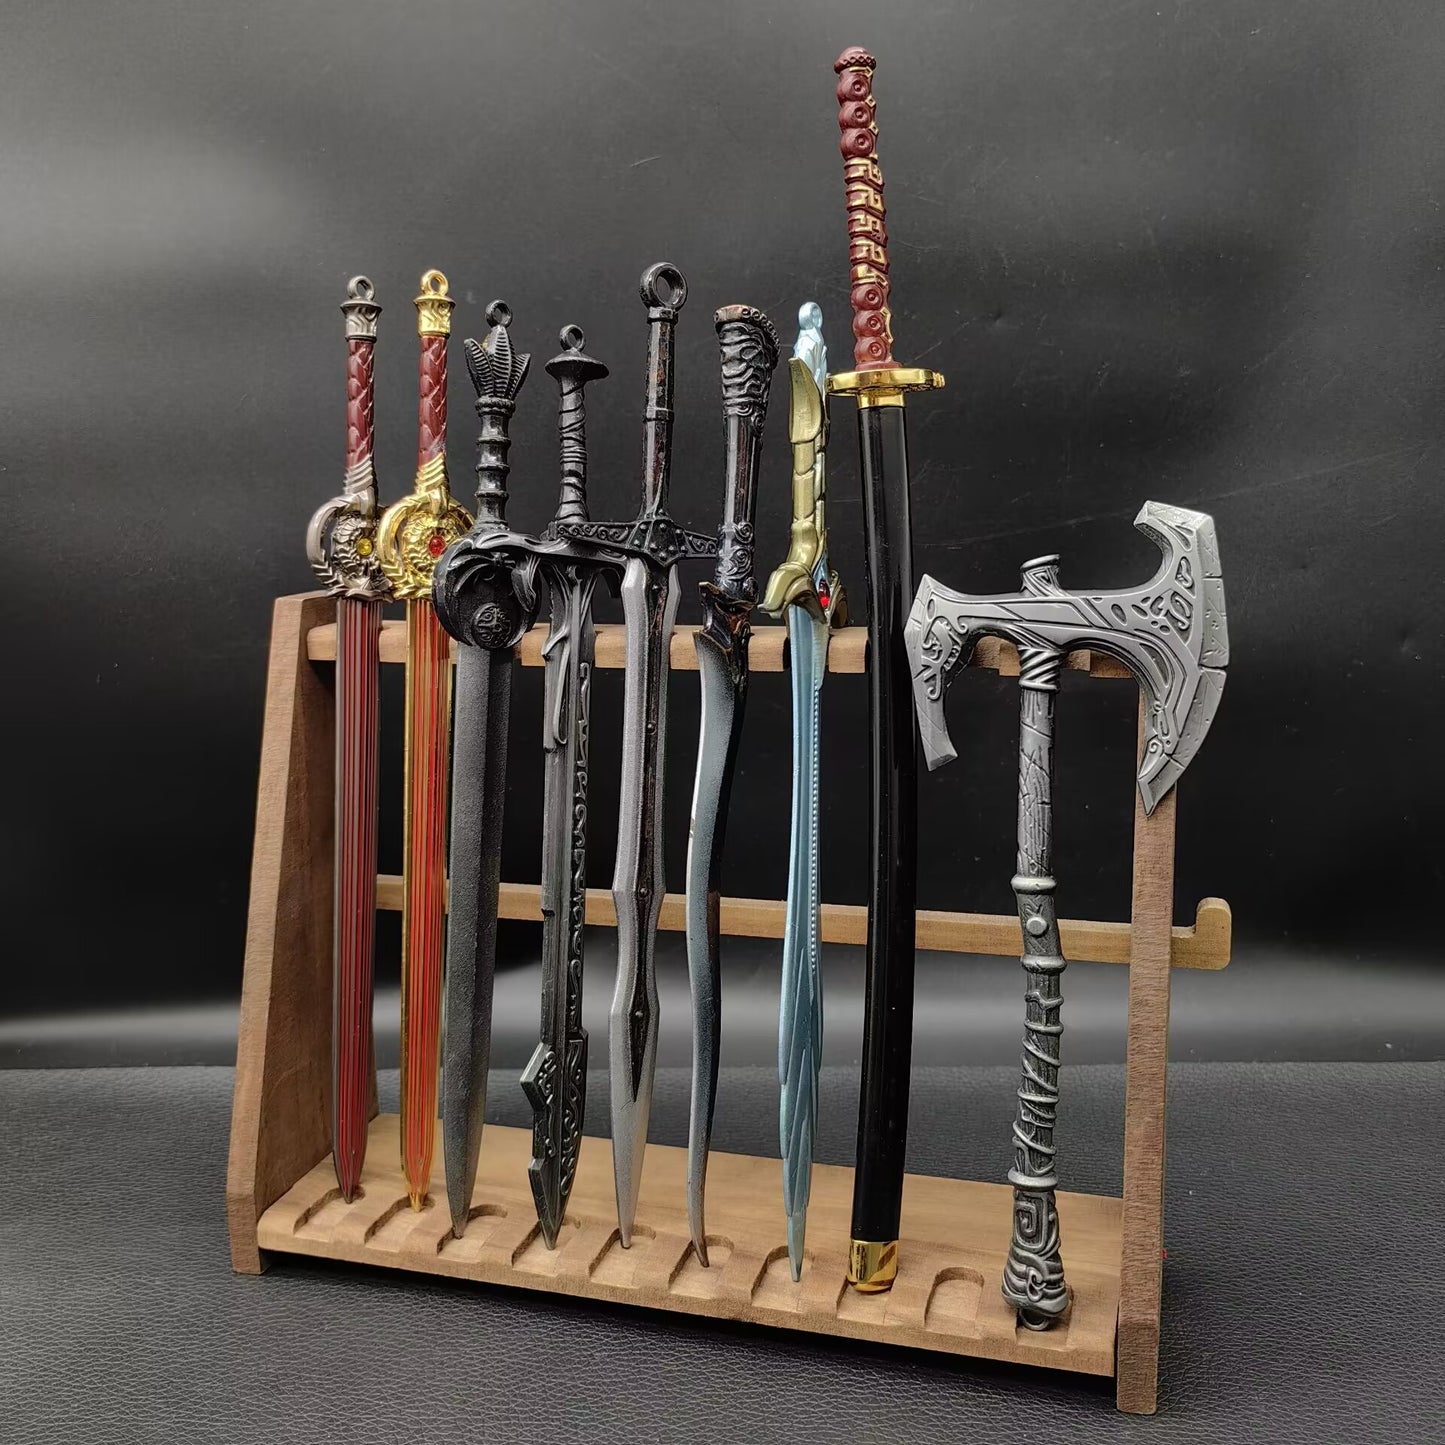 10-Layer Vertical Small Sword Small Long Handle Weapon Wood Display Holder Wooden Kit